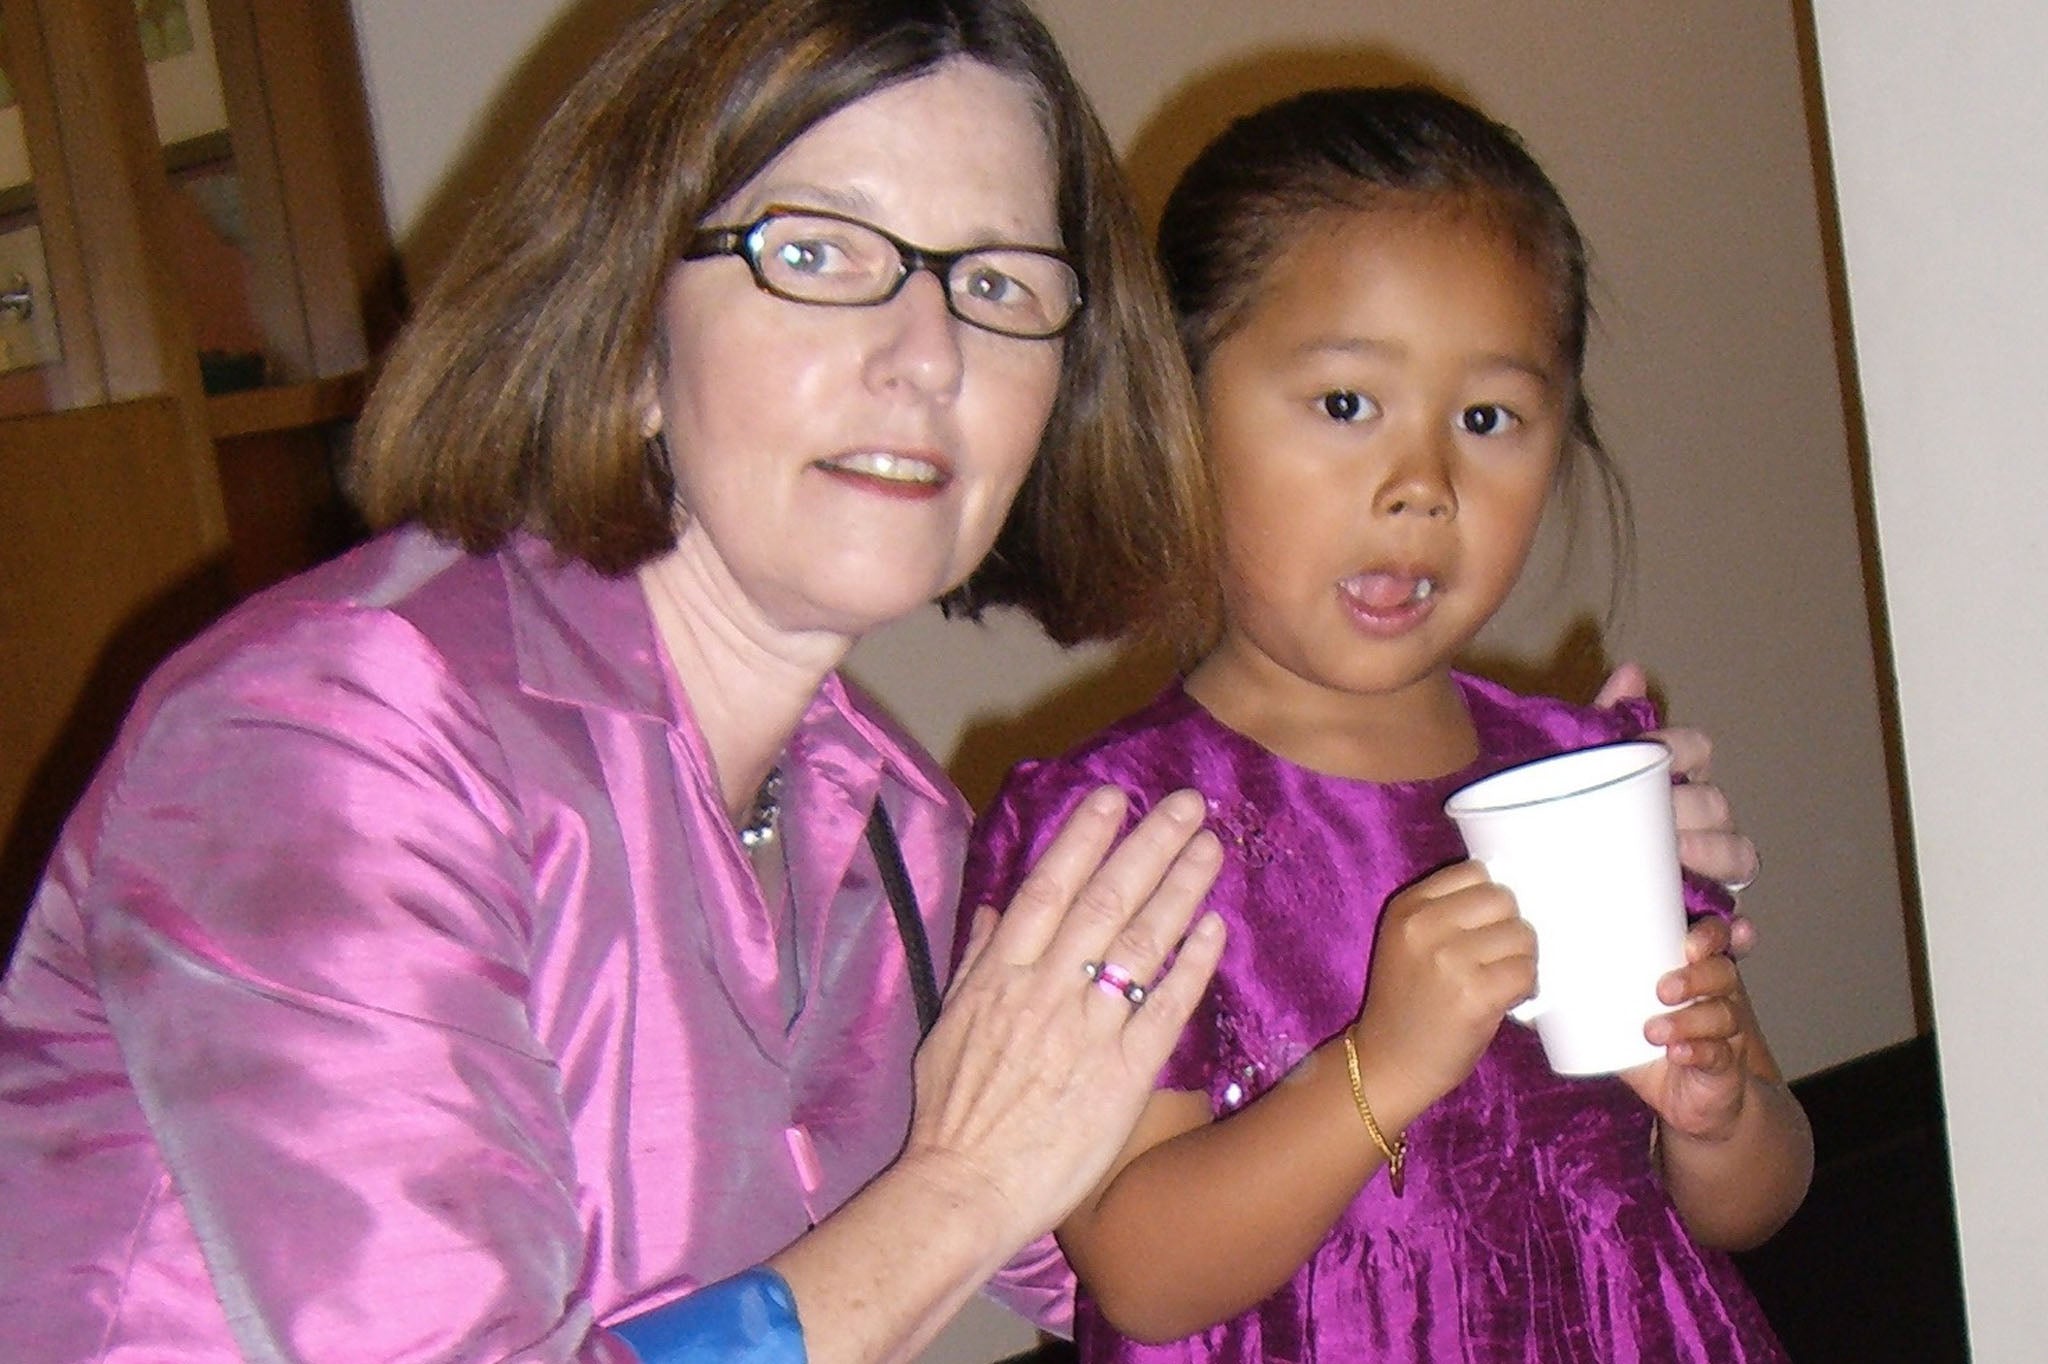 Patricia Belyea and Chloe Fung